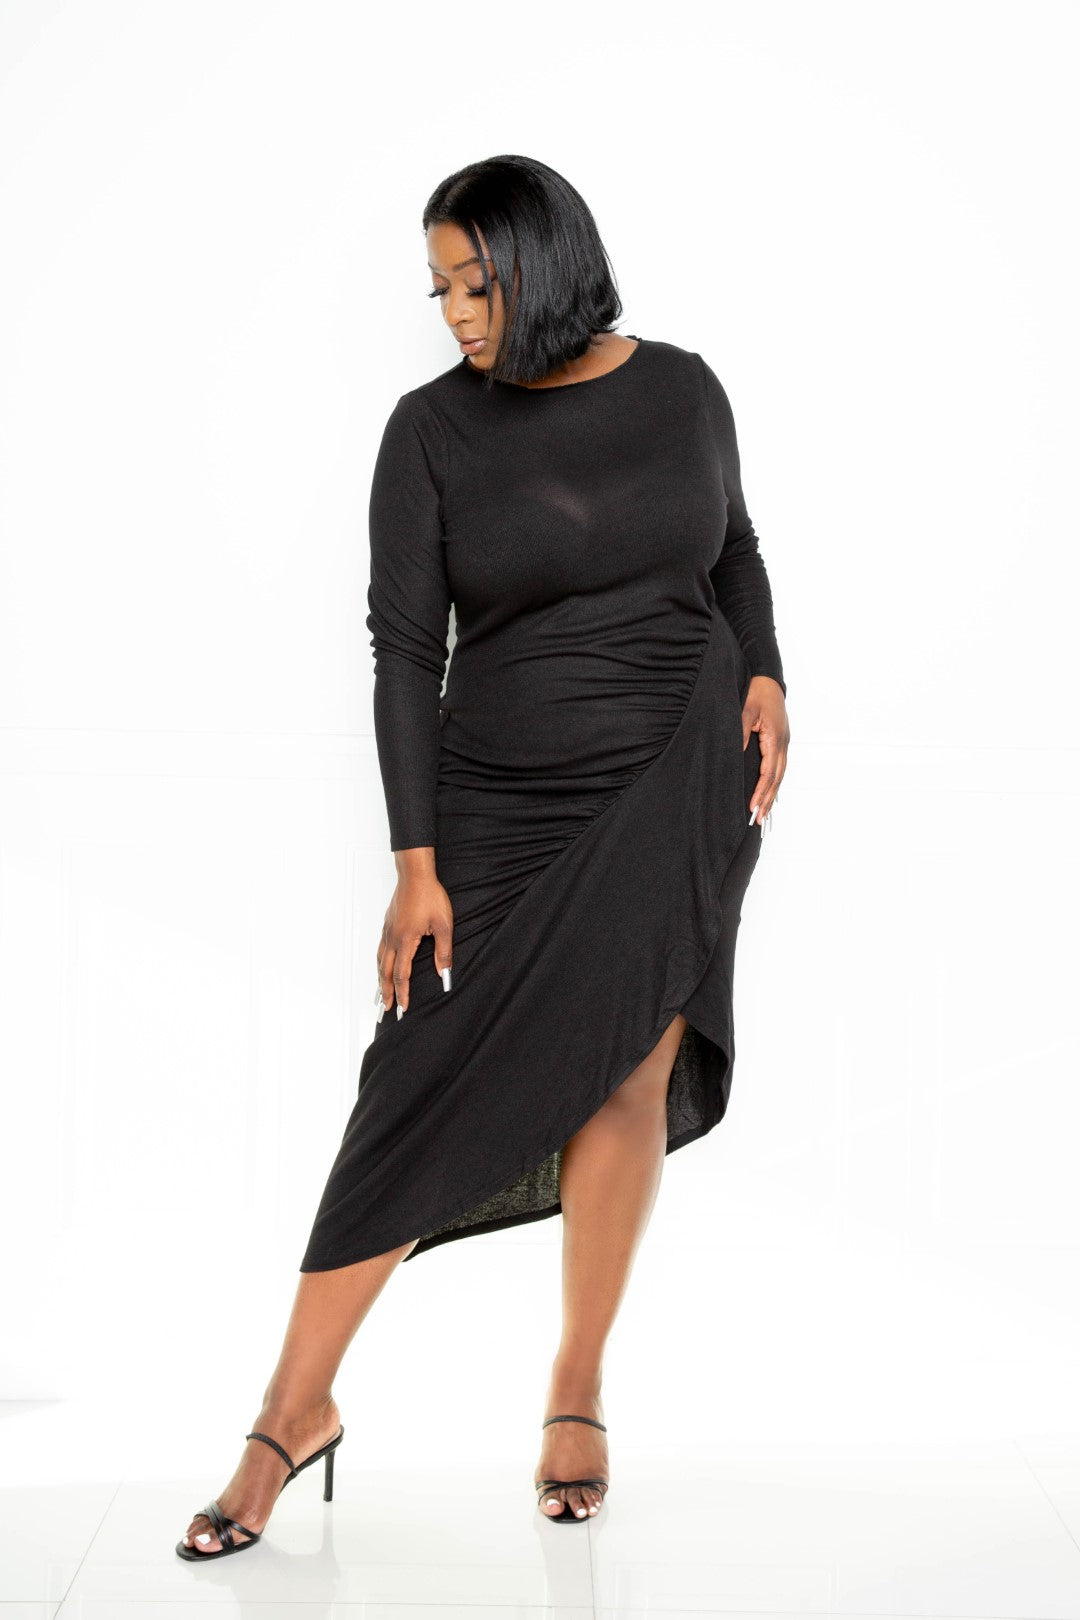 Plus Size Asymmetrical Sweater Dress With Waterfall Ruffle | CCPRODUCTS, NEW ARRIVALS, PLUS SIZE, PLUS SIZE DRESSES | Style Your Curves